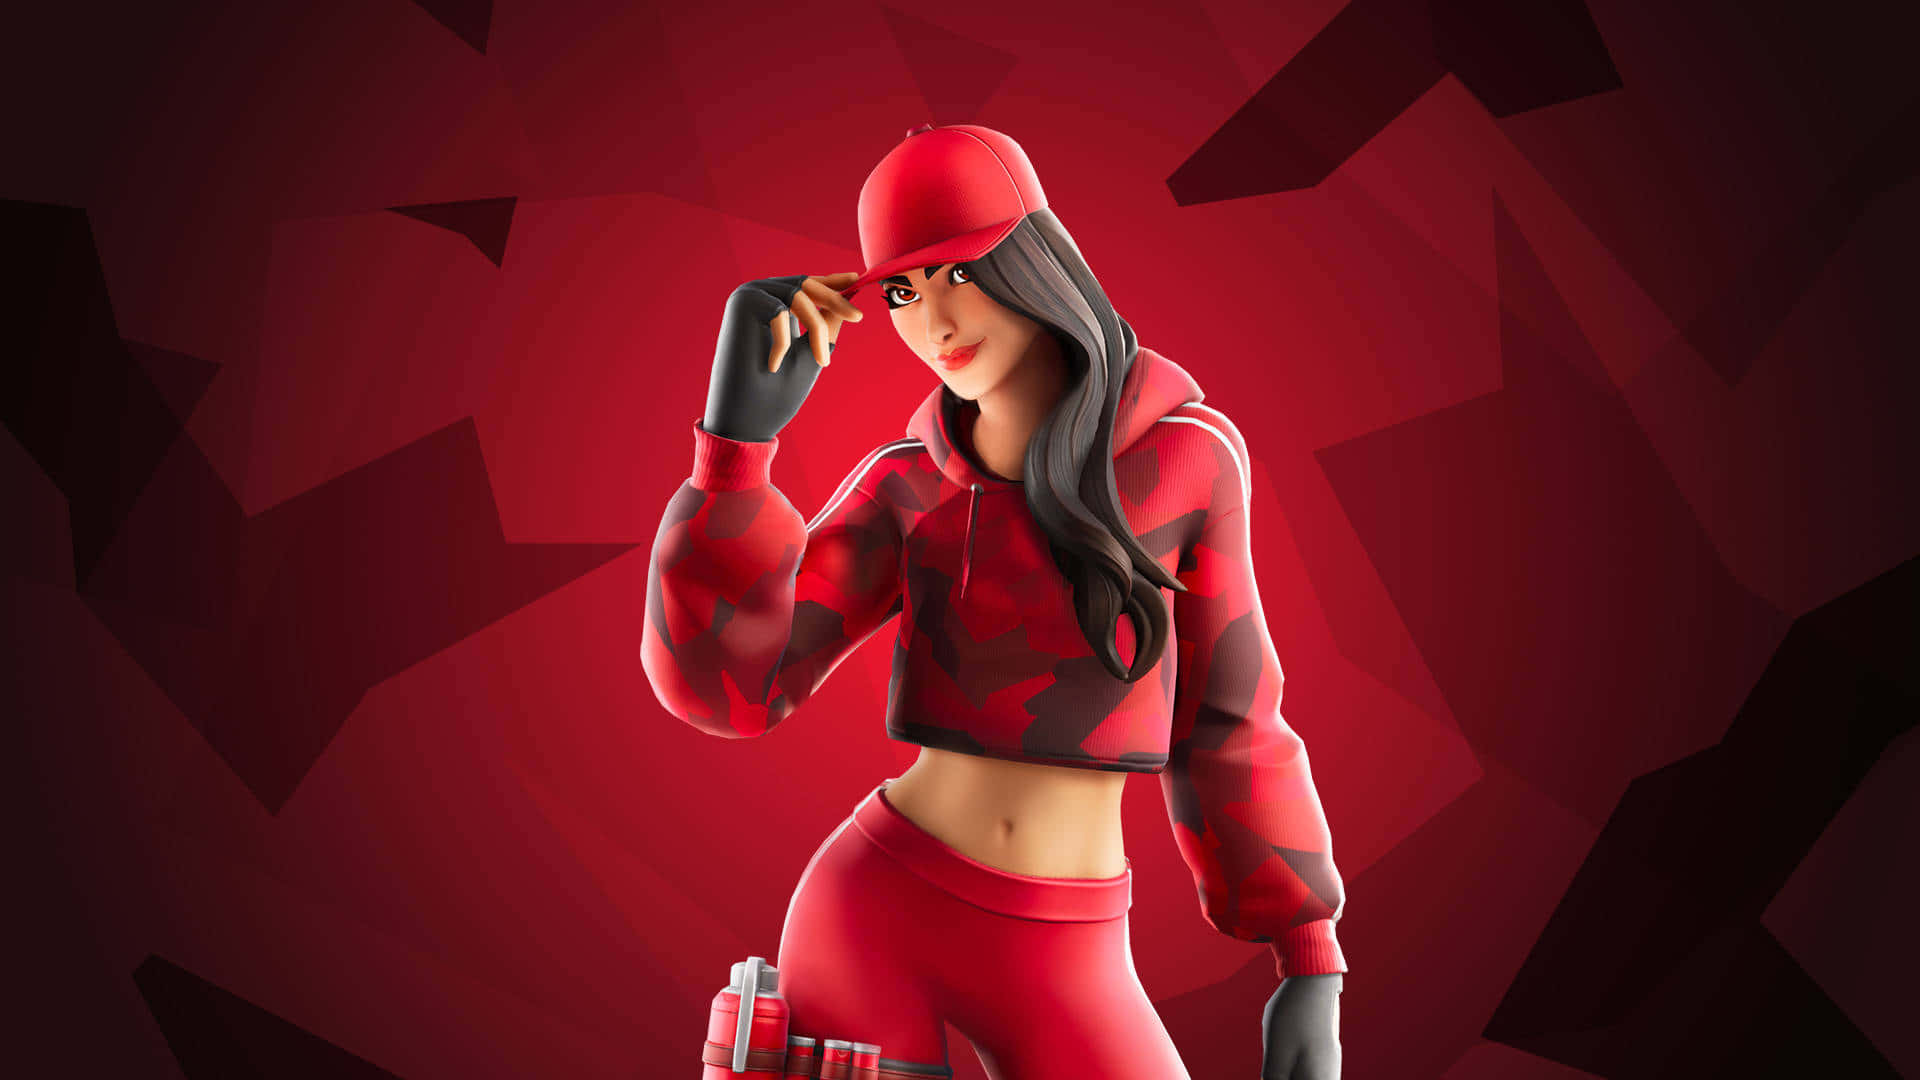 Conquer the Battle Royale with this Fortnite Profile Picture